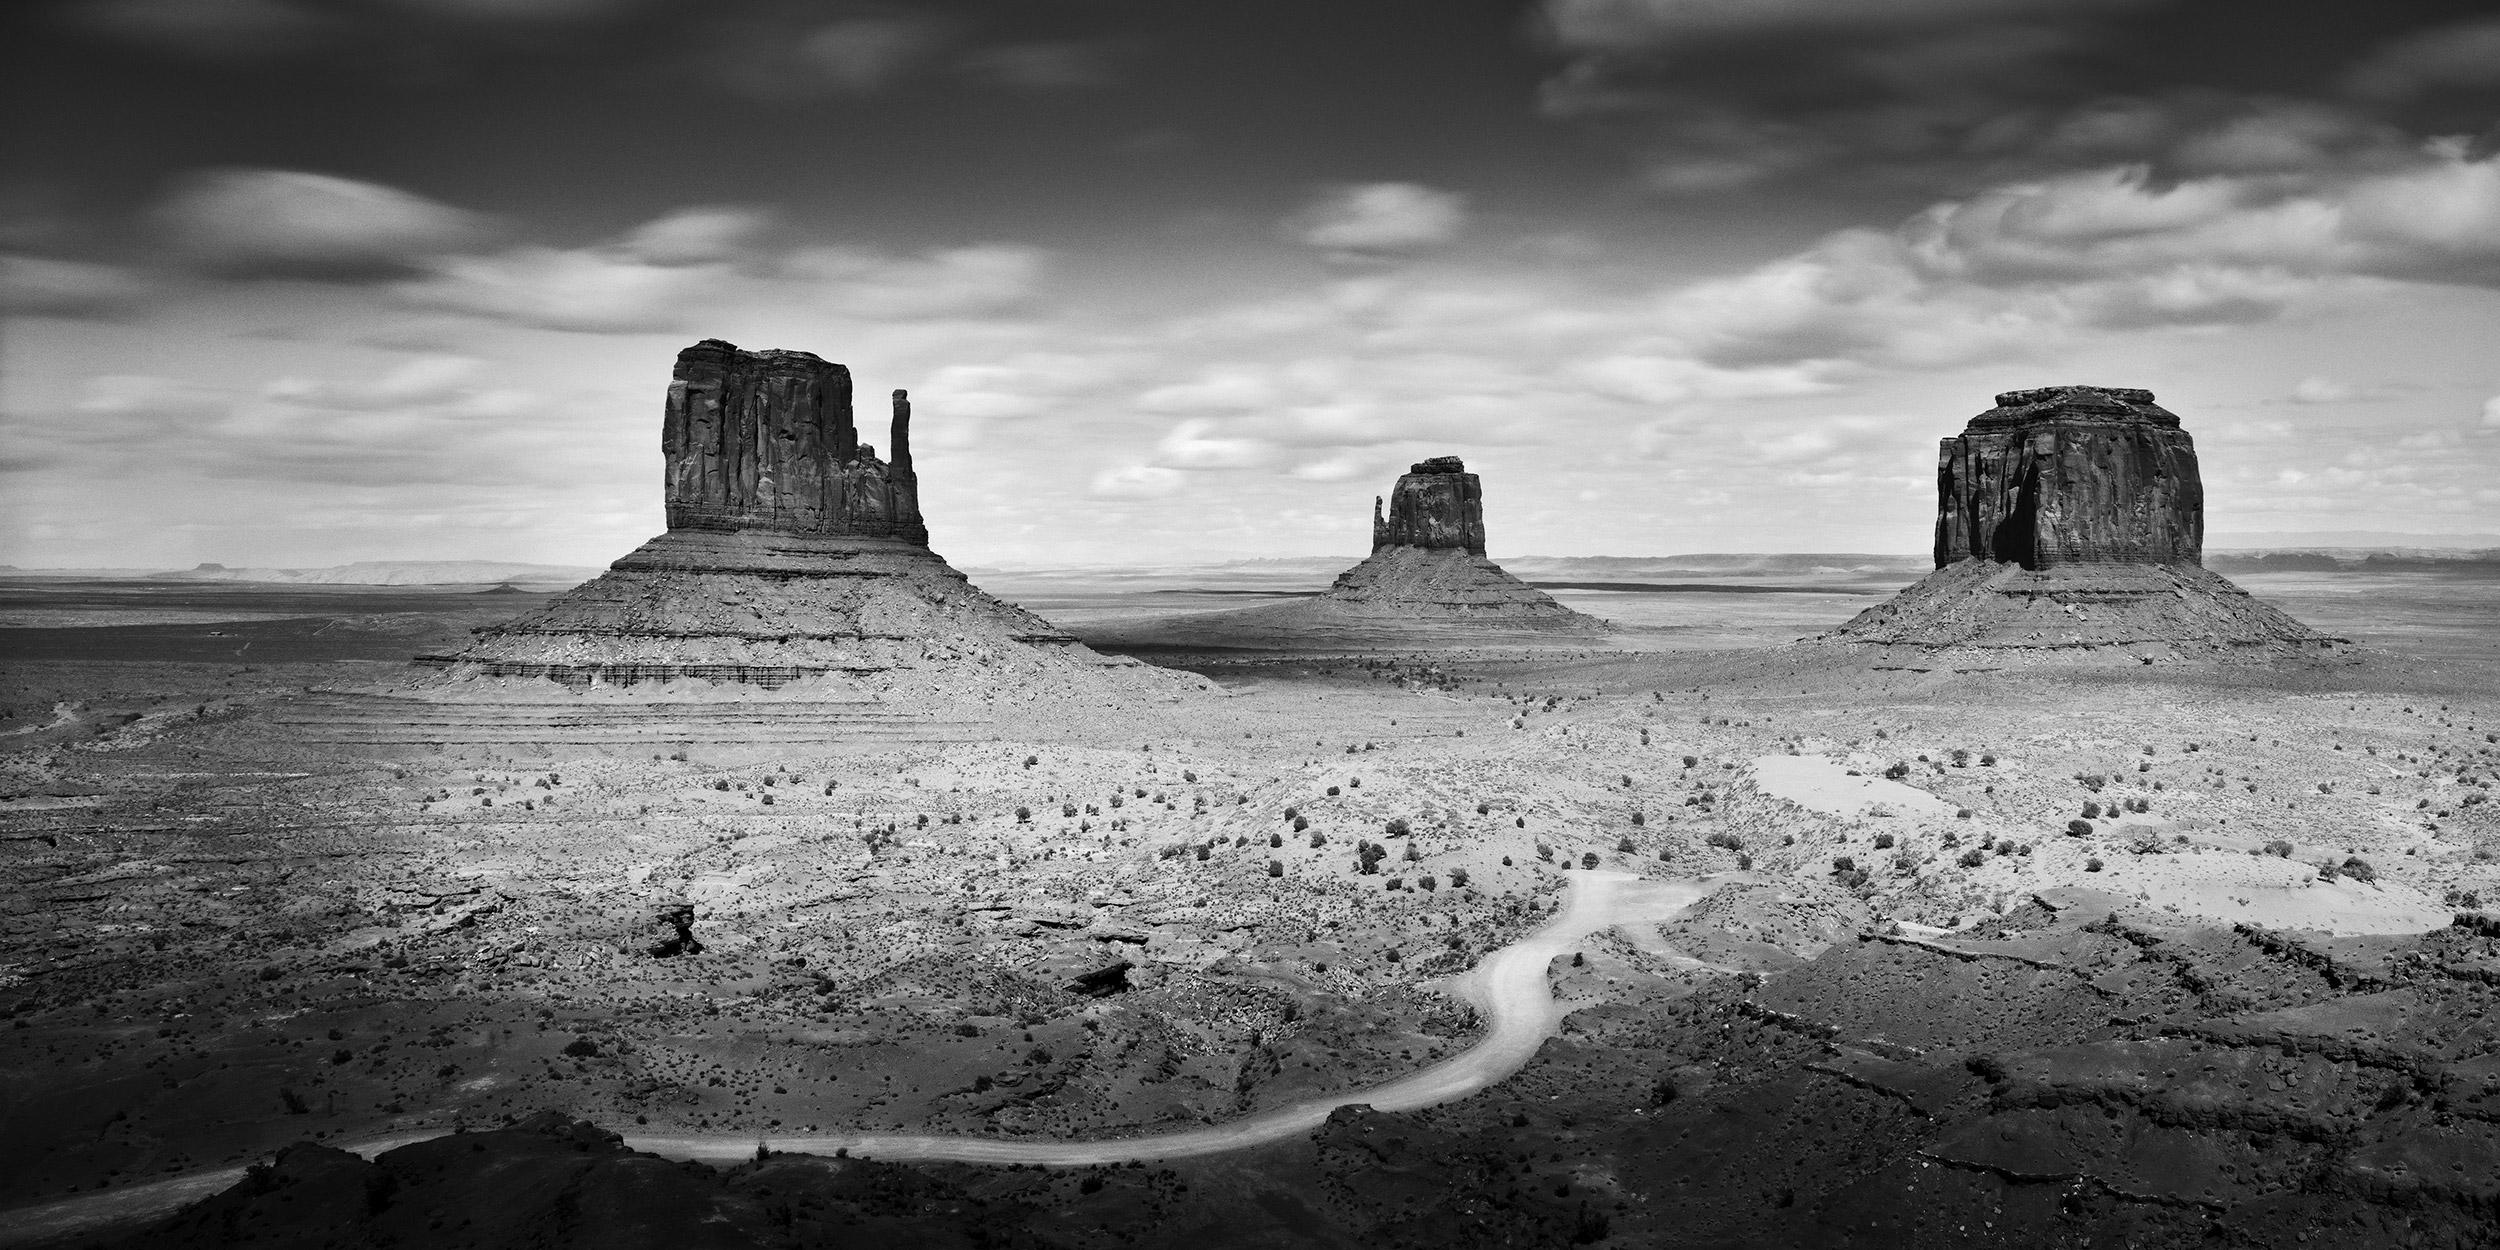 Gerald Berghammer Landscape Photograph - Monument Valley, Panorama, Arizona, USA, black and white photography, landscape